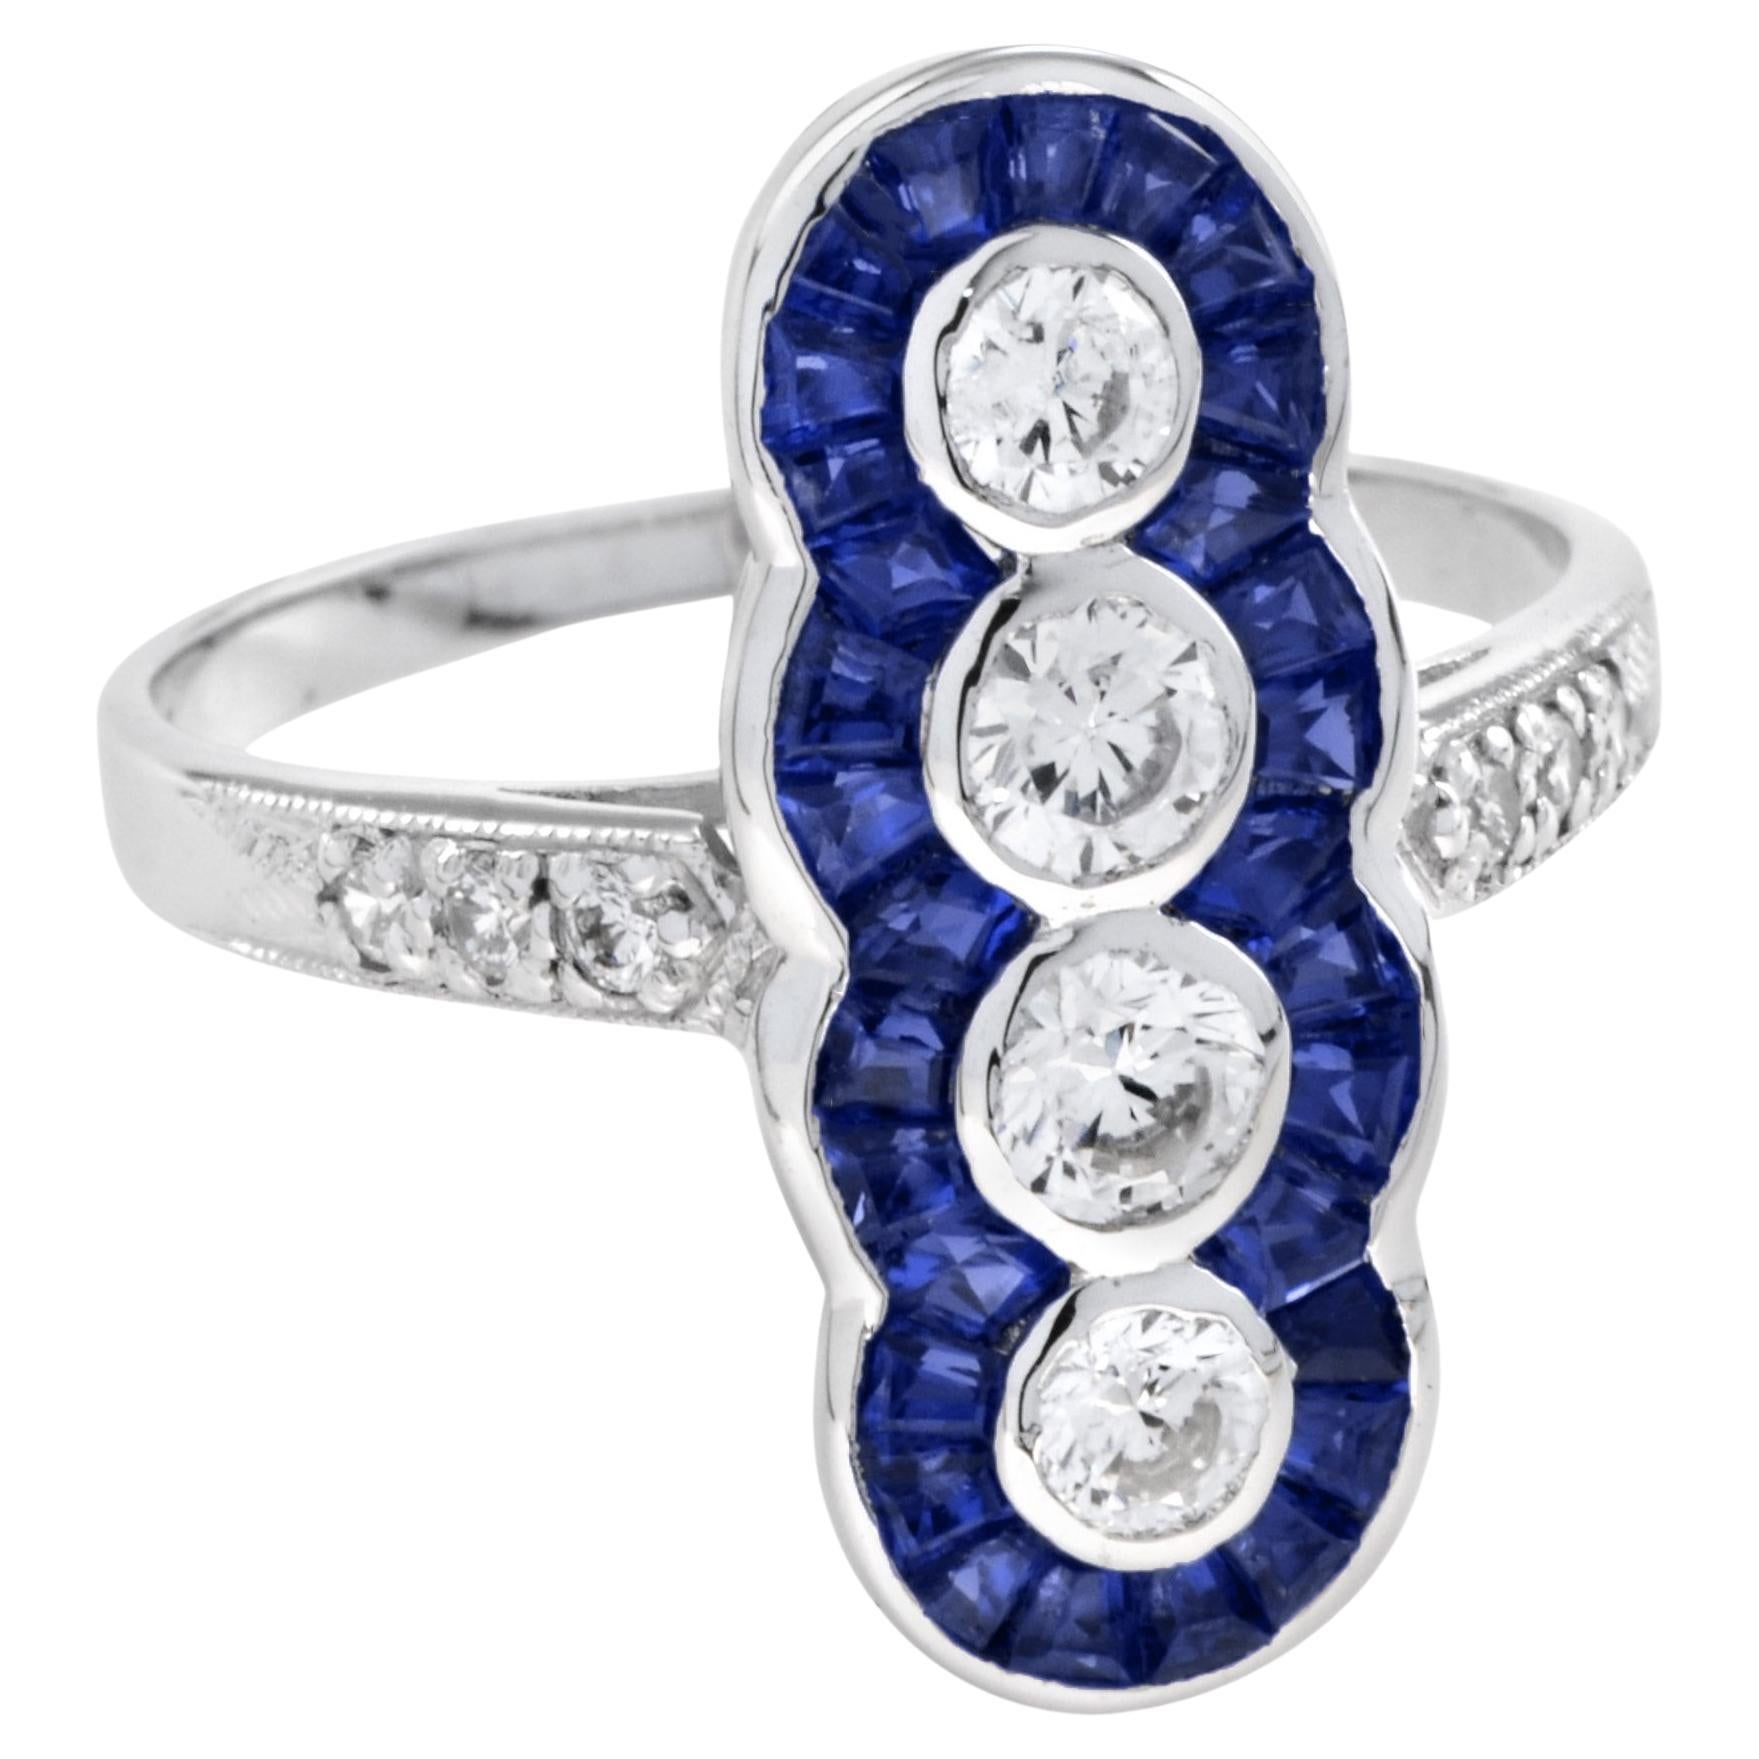 Four Stone Diamond and Sapphire Cocktail Ring in 14K White Gold